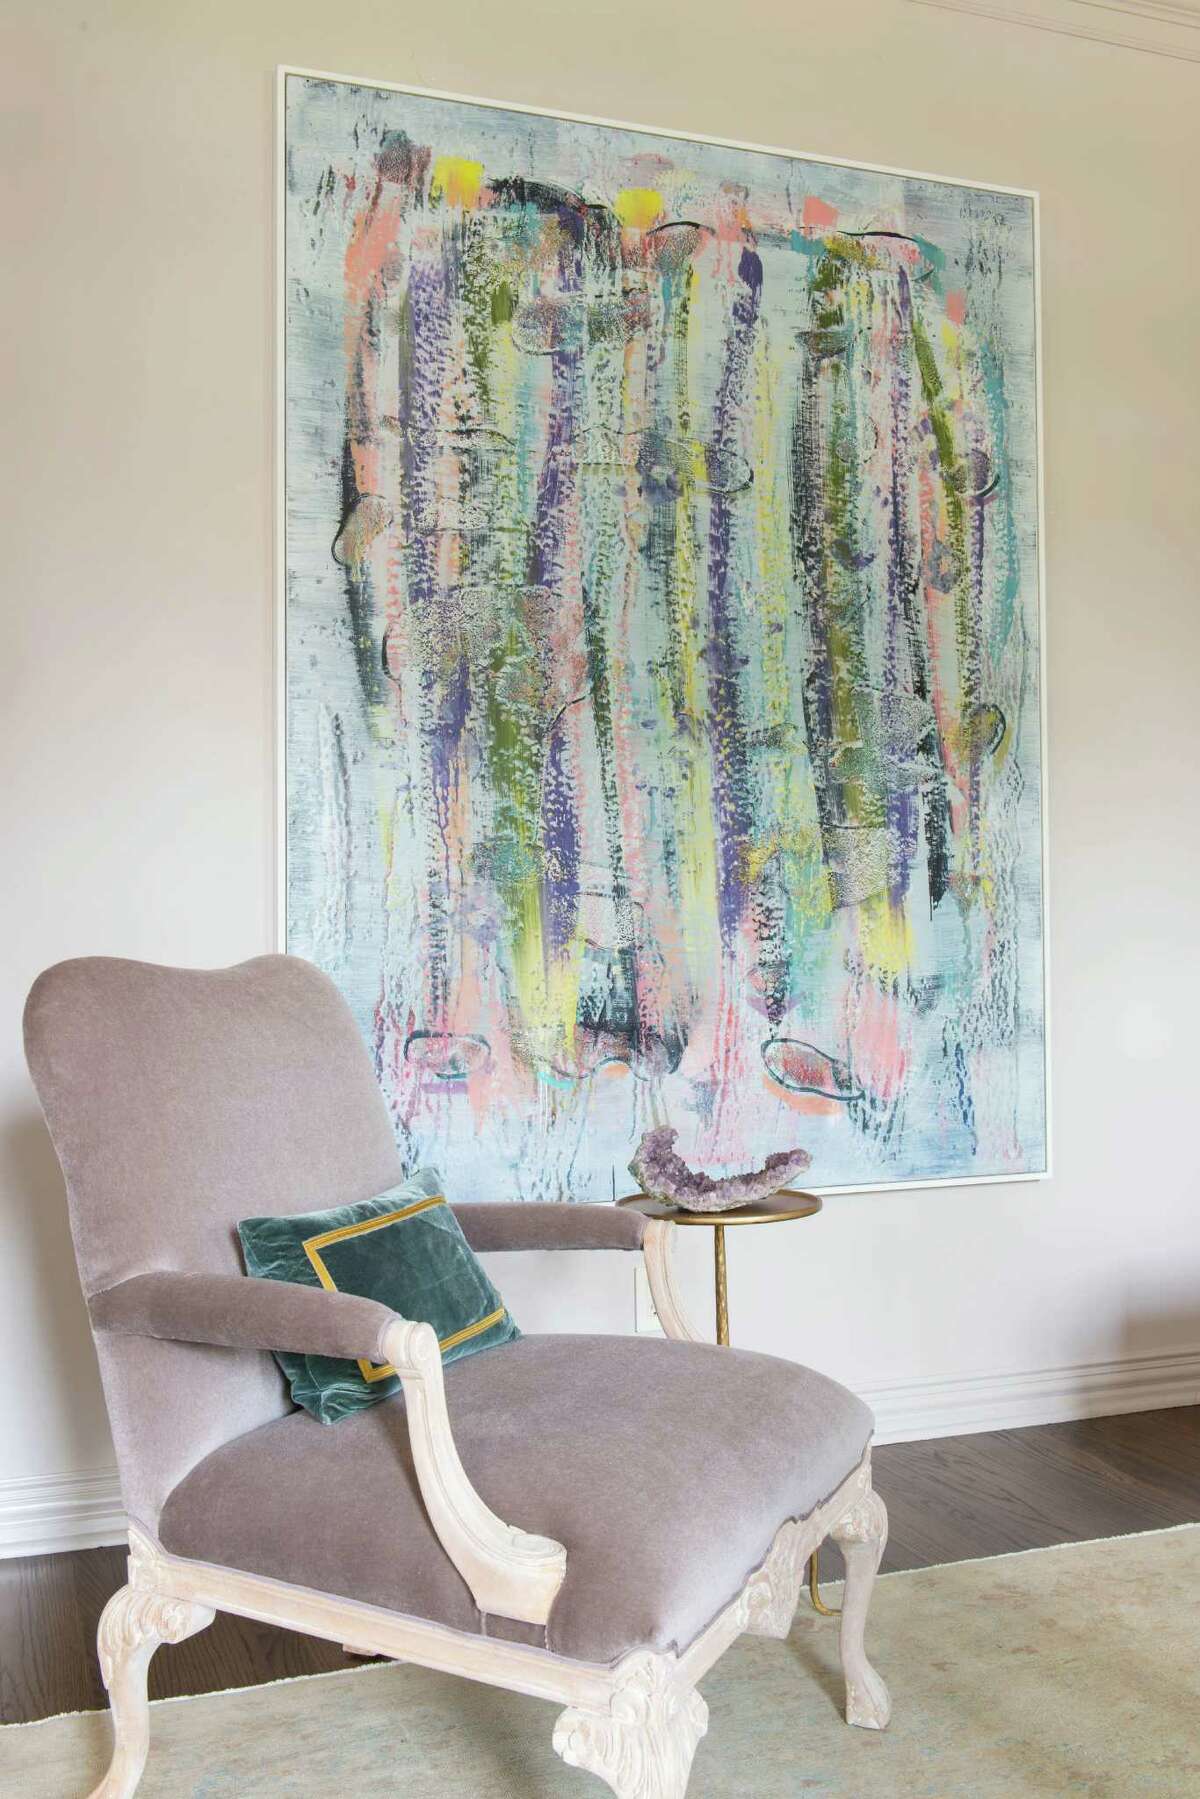 A painting by Jon Pestoni dominates one wall of the formal sitting room, adding a pop of color that coordinates with the room's pale neutrals.